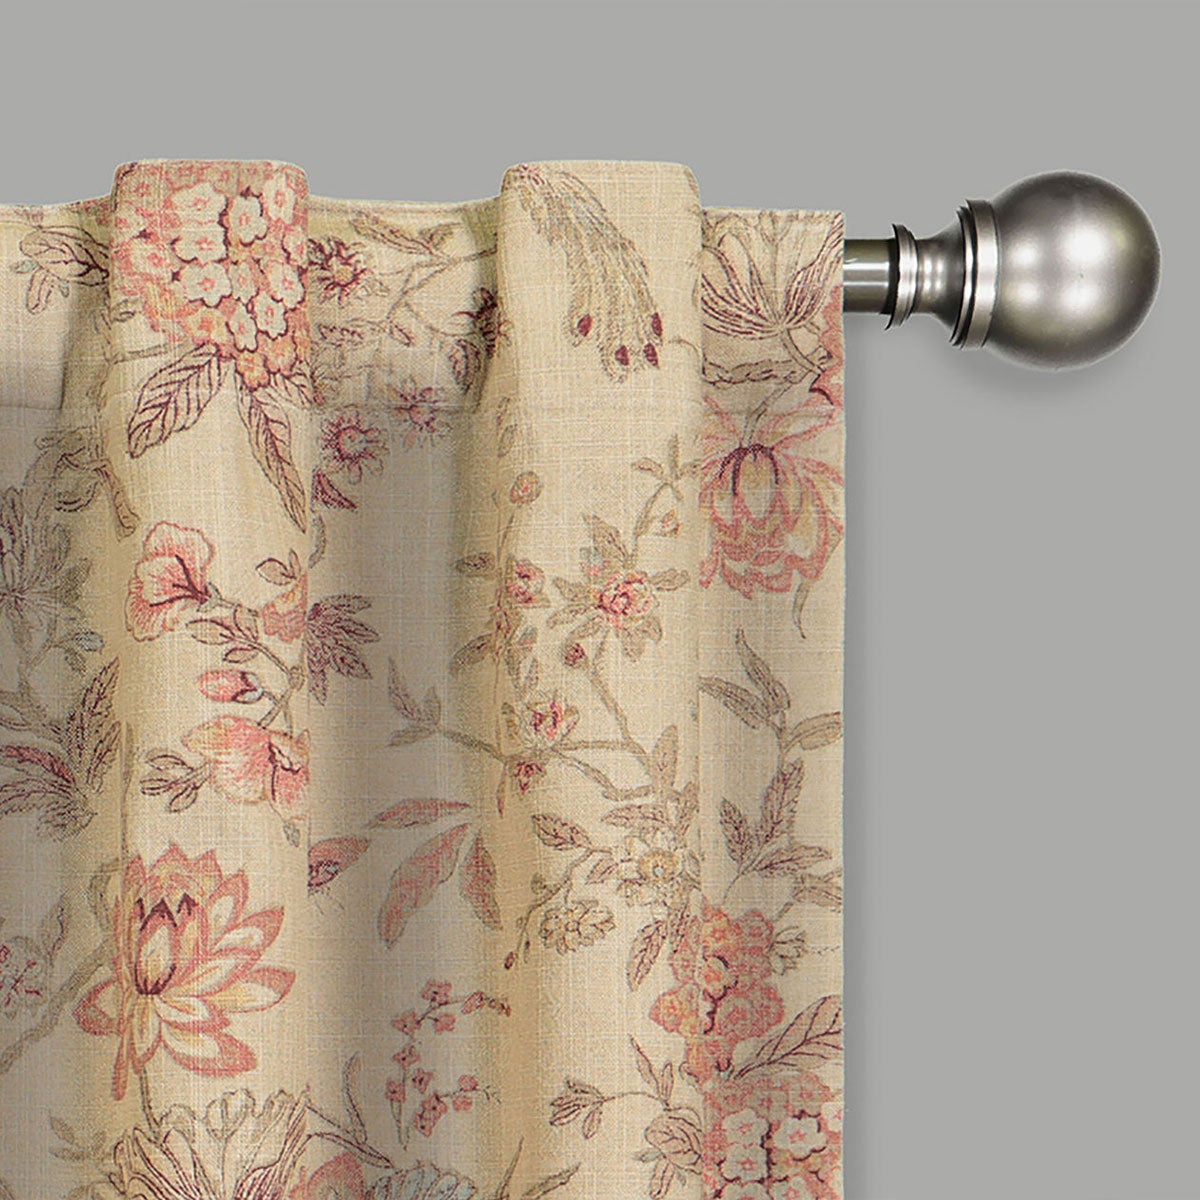 With These Dramatic Drapes, Curtains Will No Longer Be an Afterthought